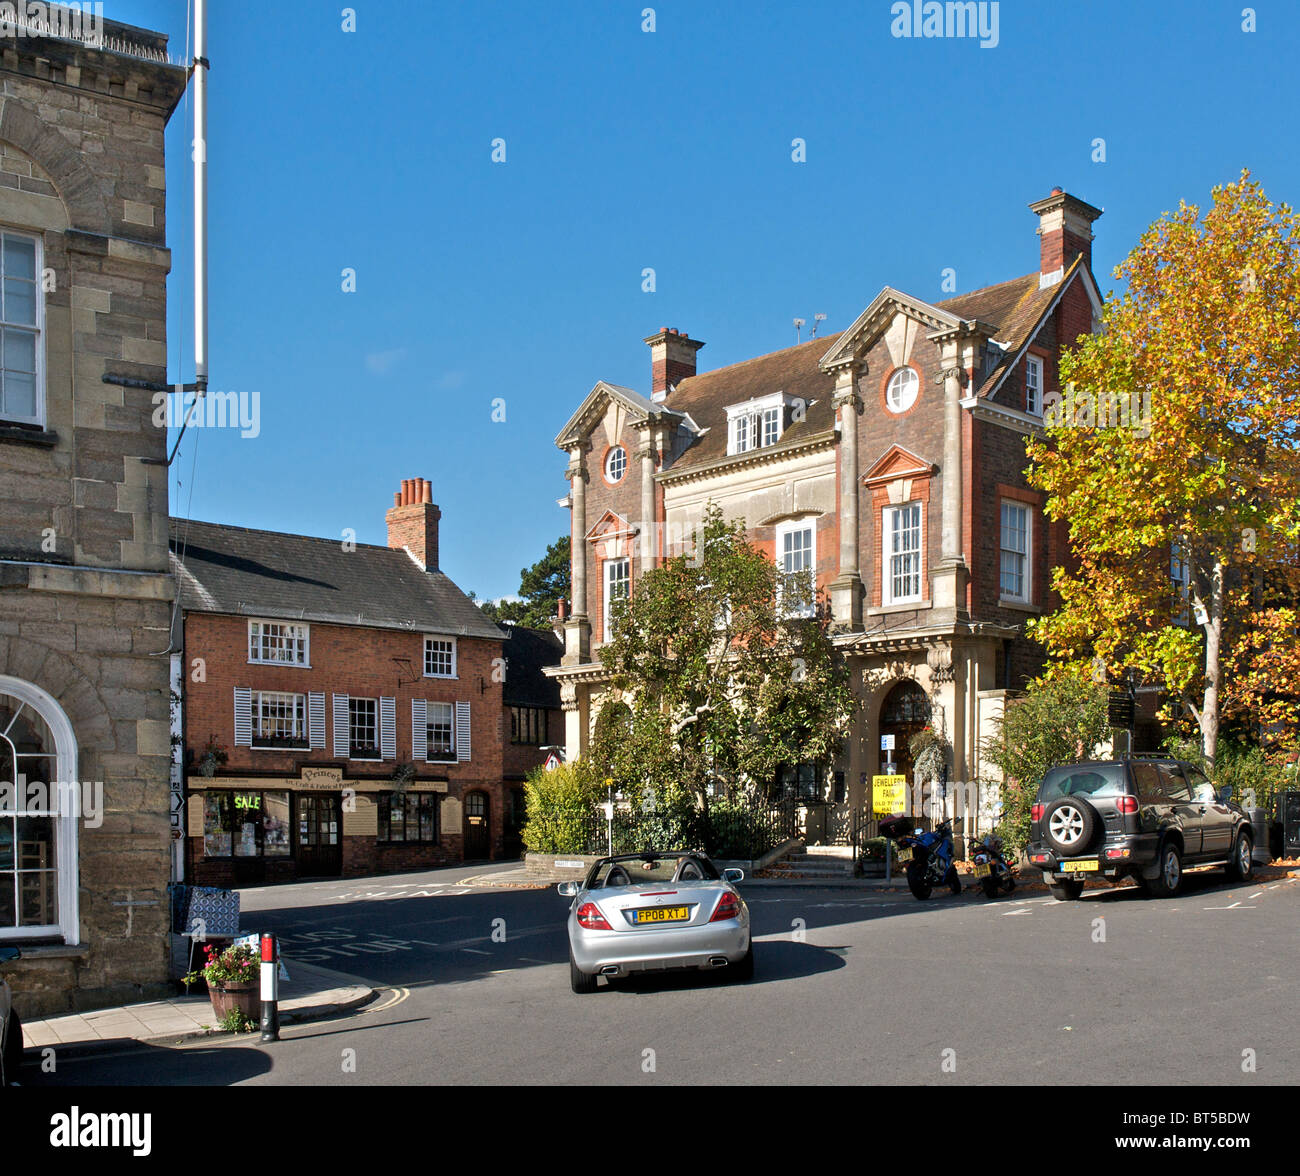 An image of the old market town of Petworth in West Sussex. UK. This is the old bank house in Market Square. Stock Photo